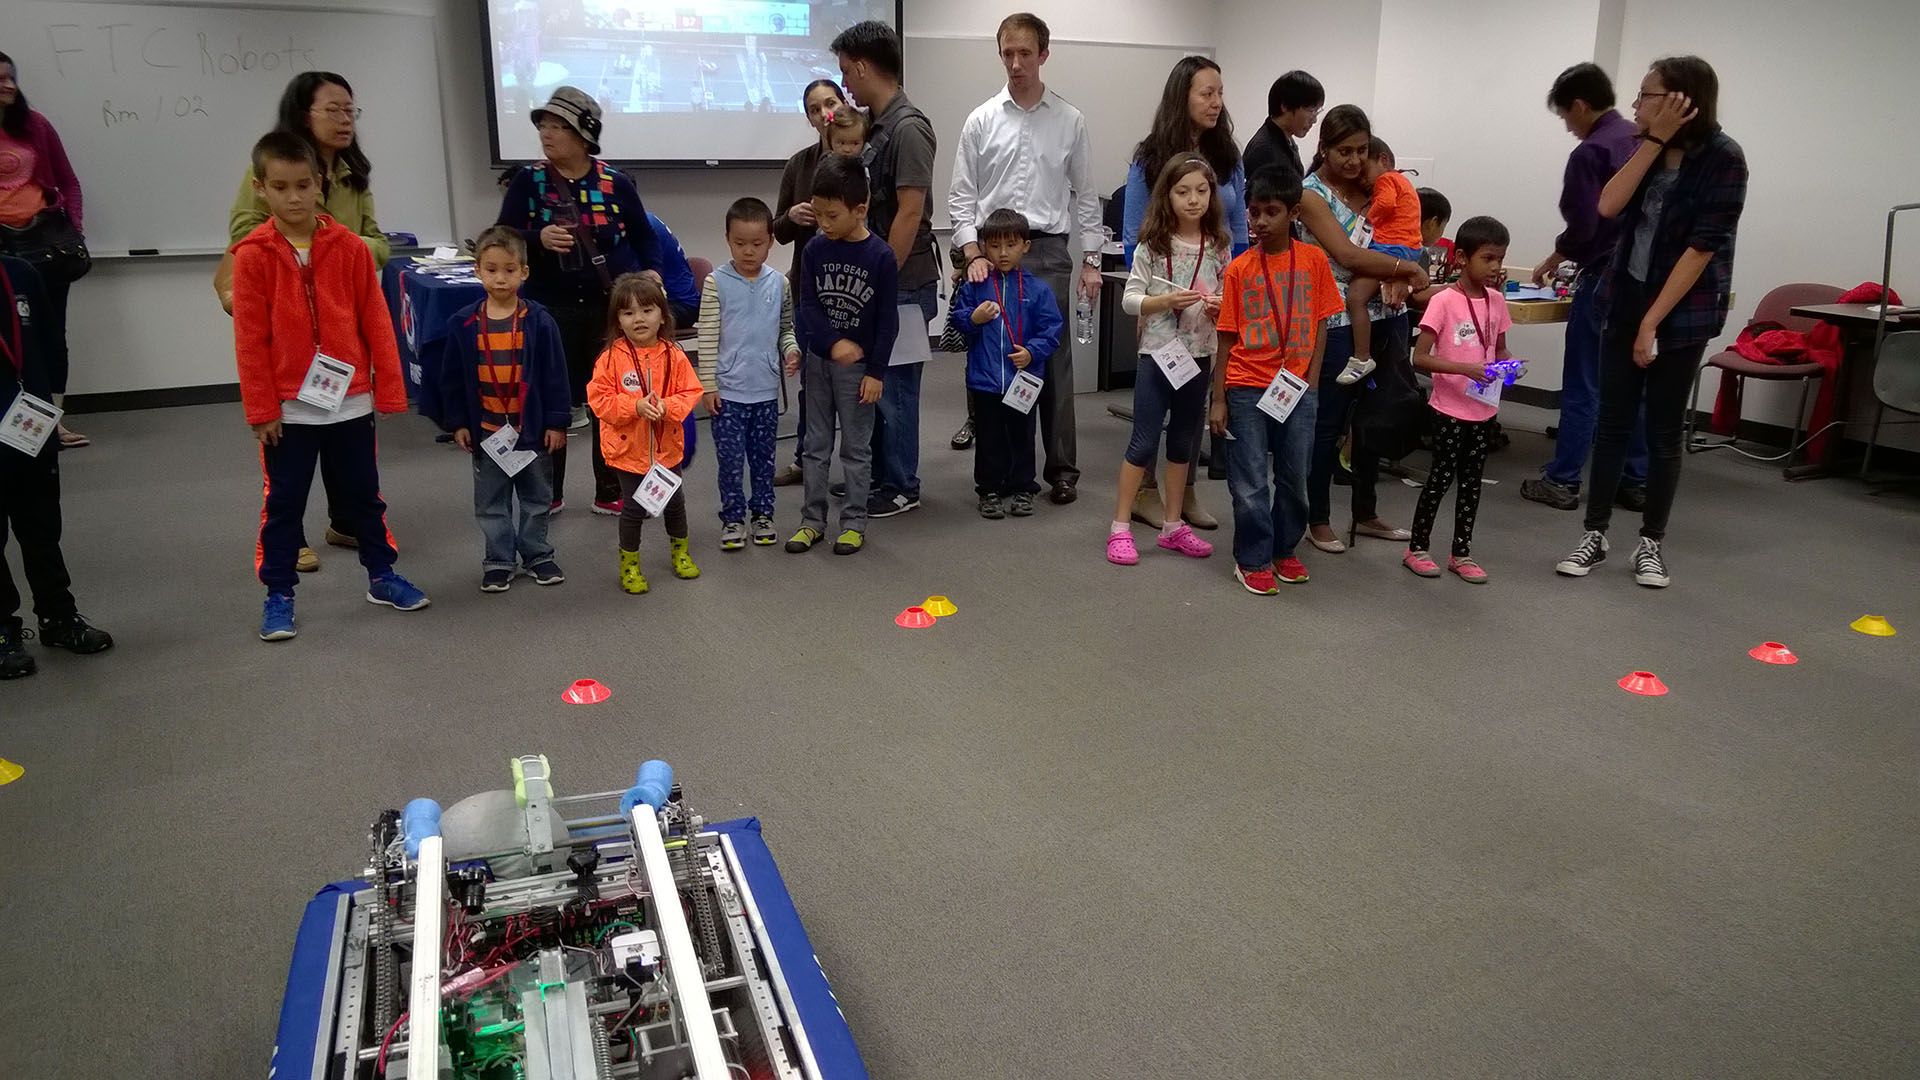 Children and parents watching the robot.